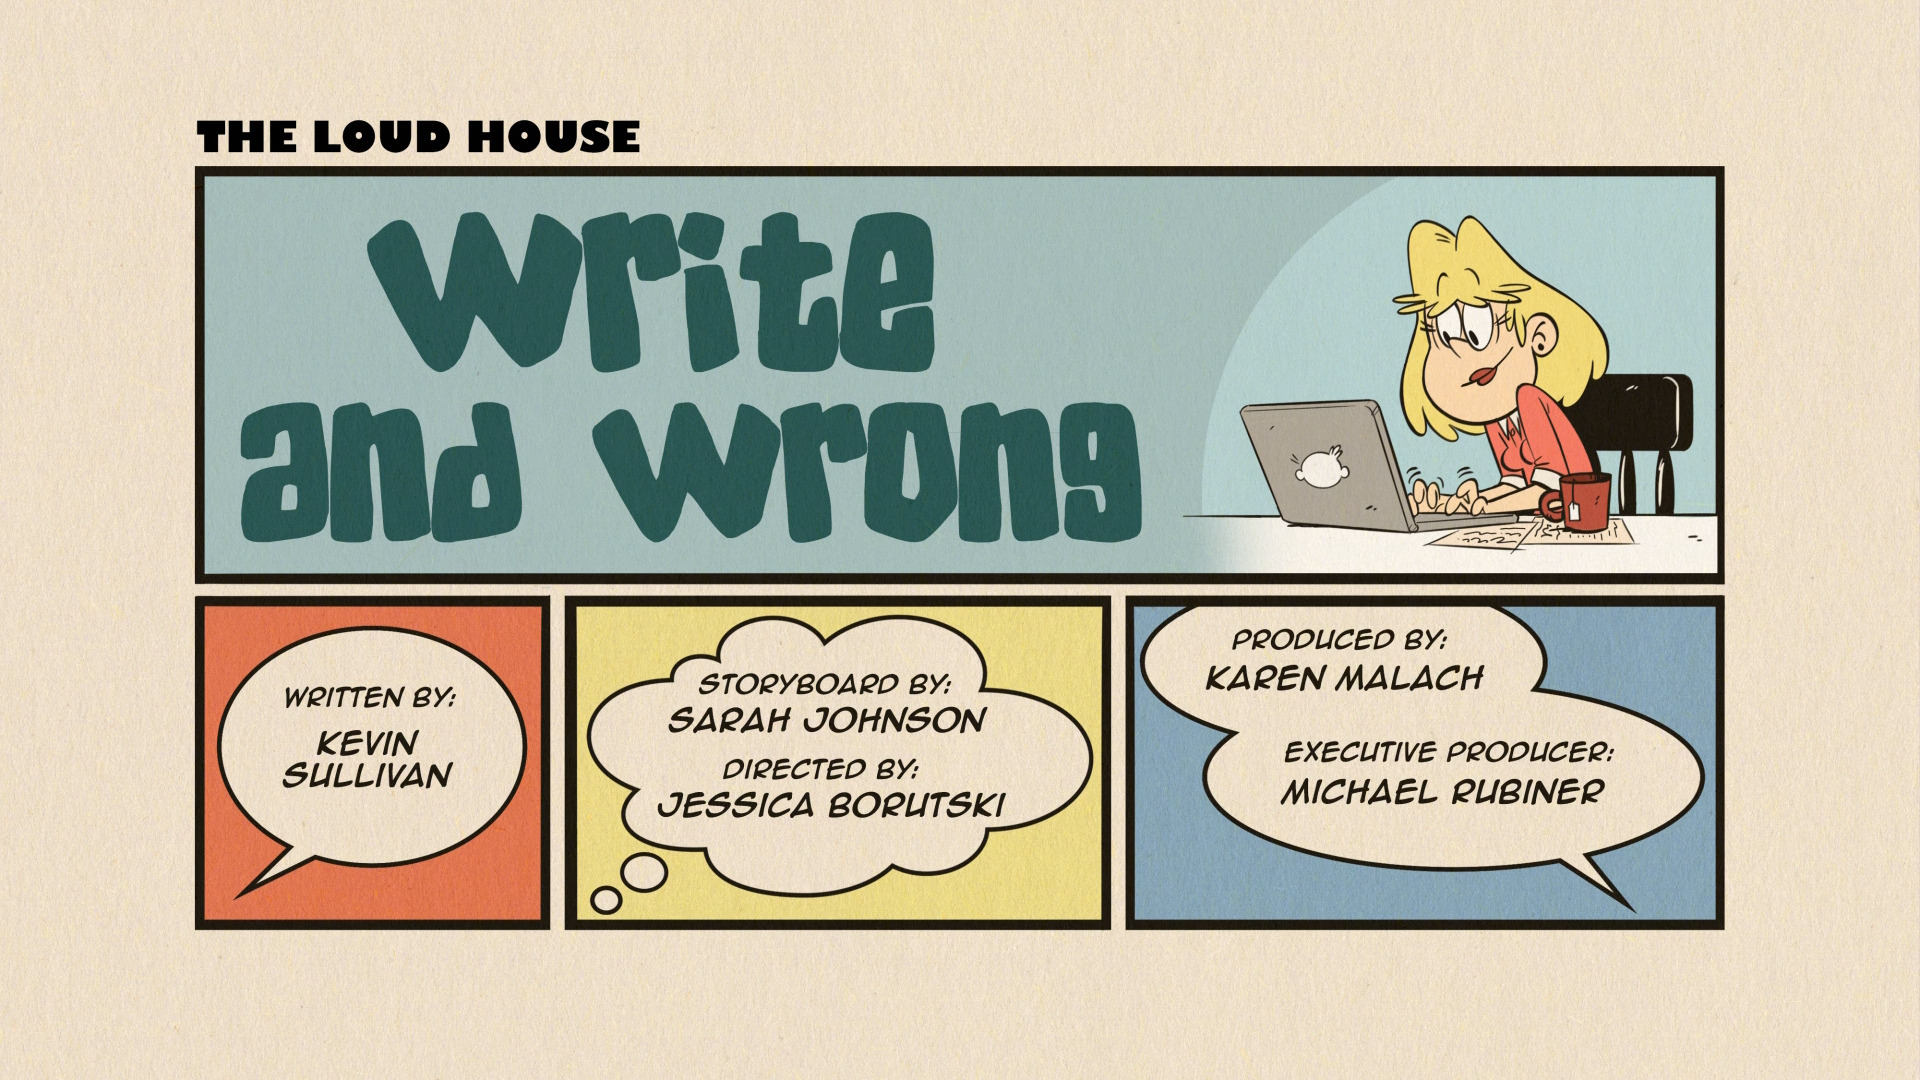 https://static.wikia.nocookie.net/theloudhouse/images/1/18/Write_and_Wrong.jpg/revision/latest?cb=20200212210535